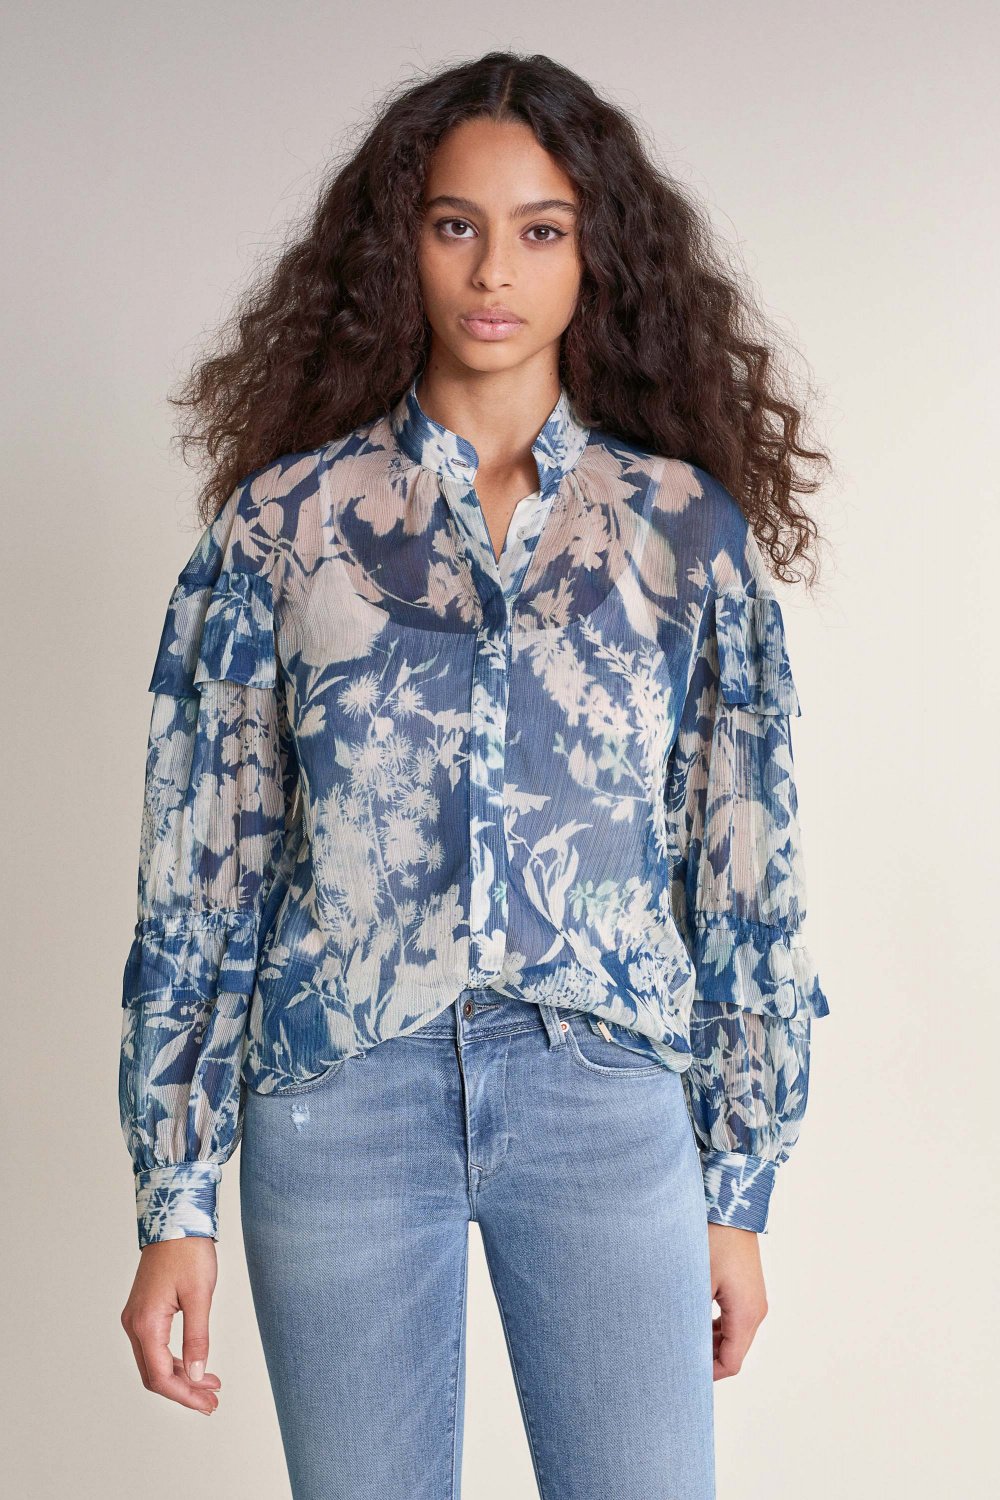 Floral print tunic with leaves - Salsa